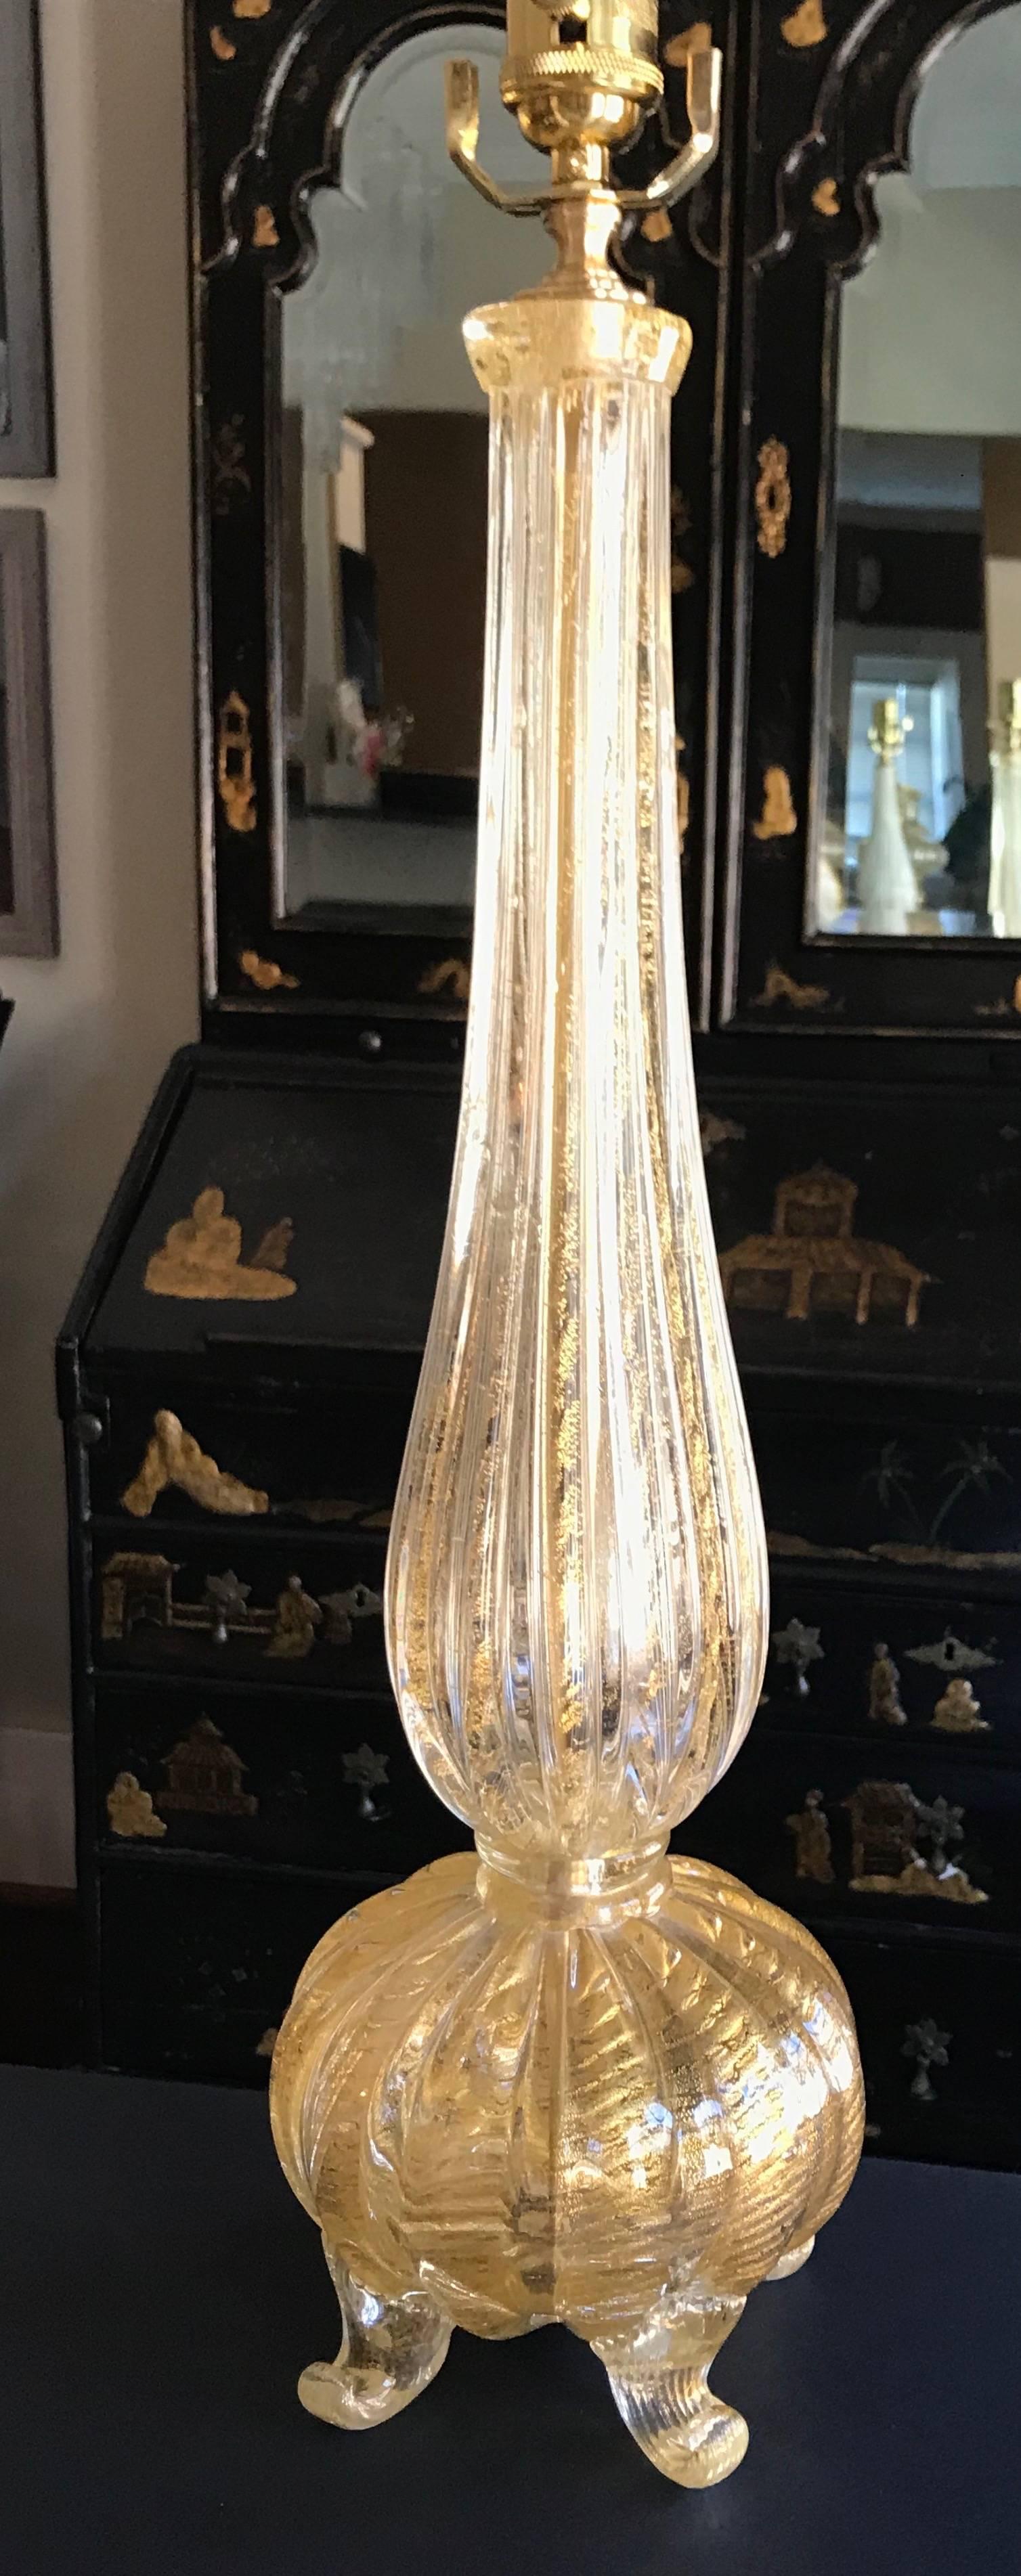 A single Italian Murano glass lamp in two parts with a footed base. This clear glass ribs with gold inclusions in the Coronado D'oro technique first developed by Barovier. Newly wired for US with full range dimmer socket, brass fittings and French